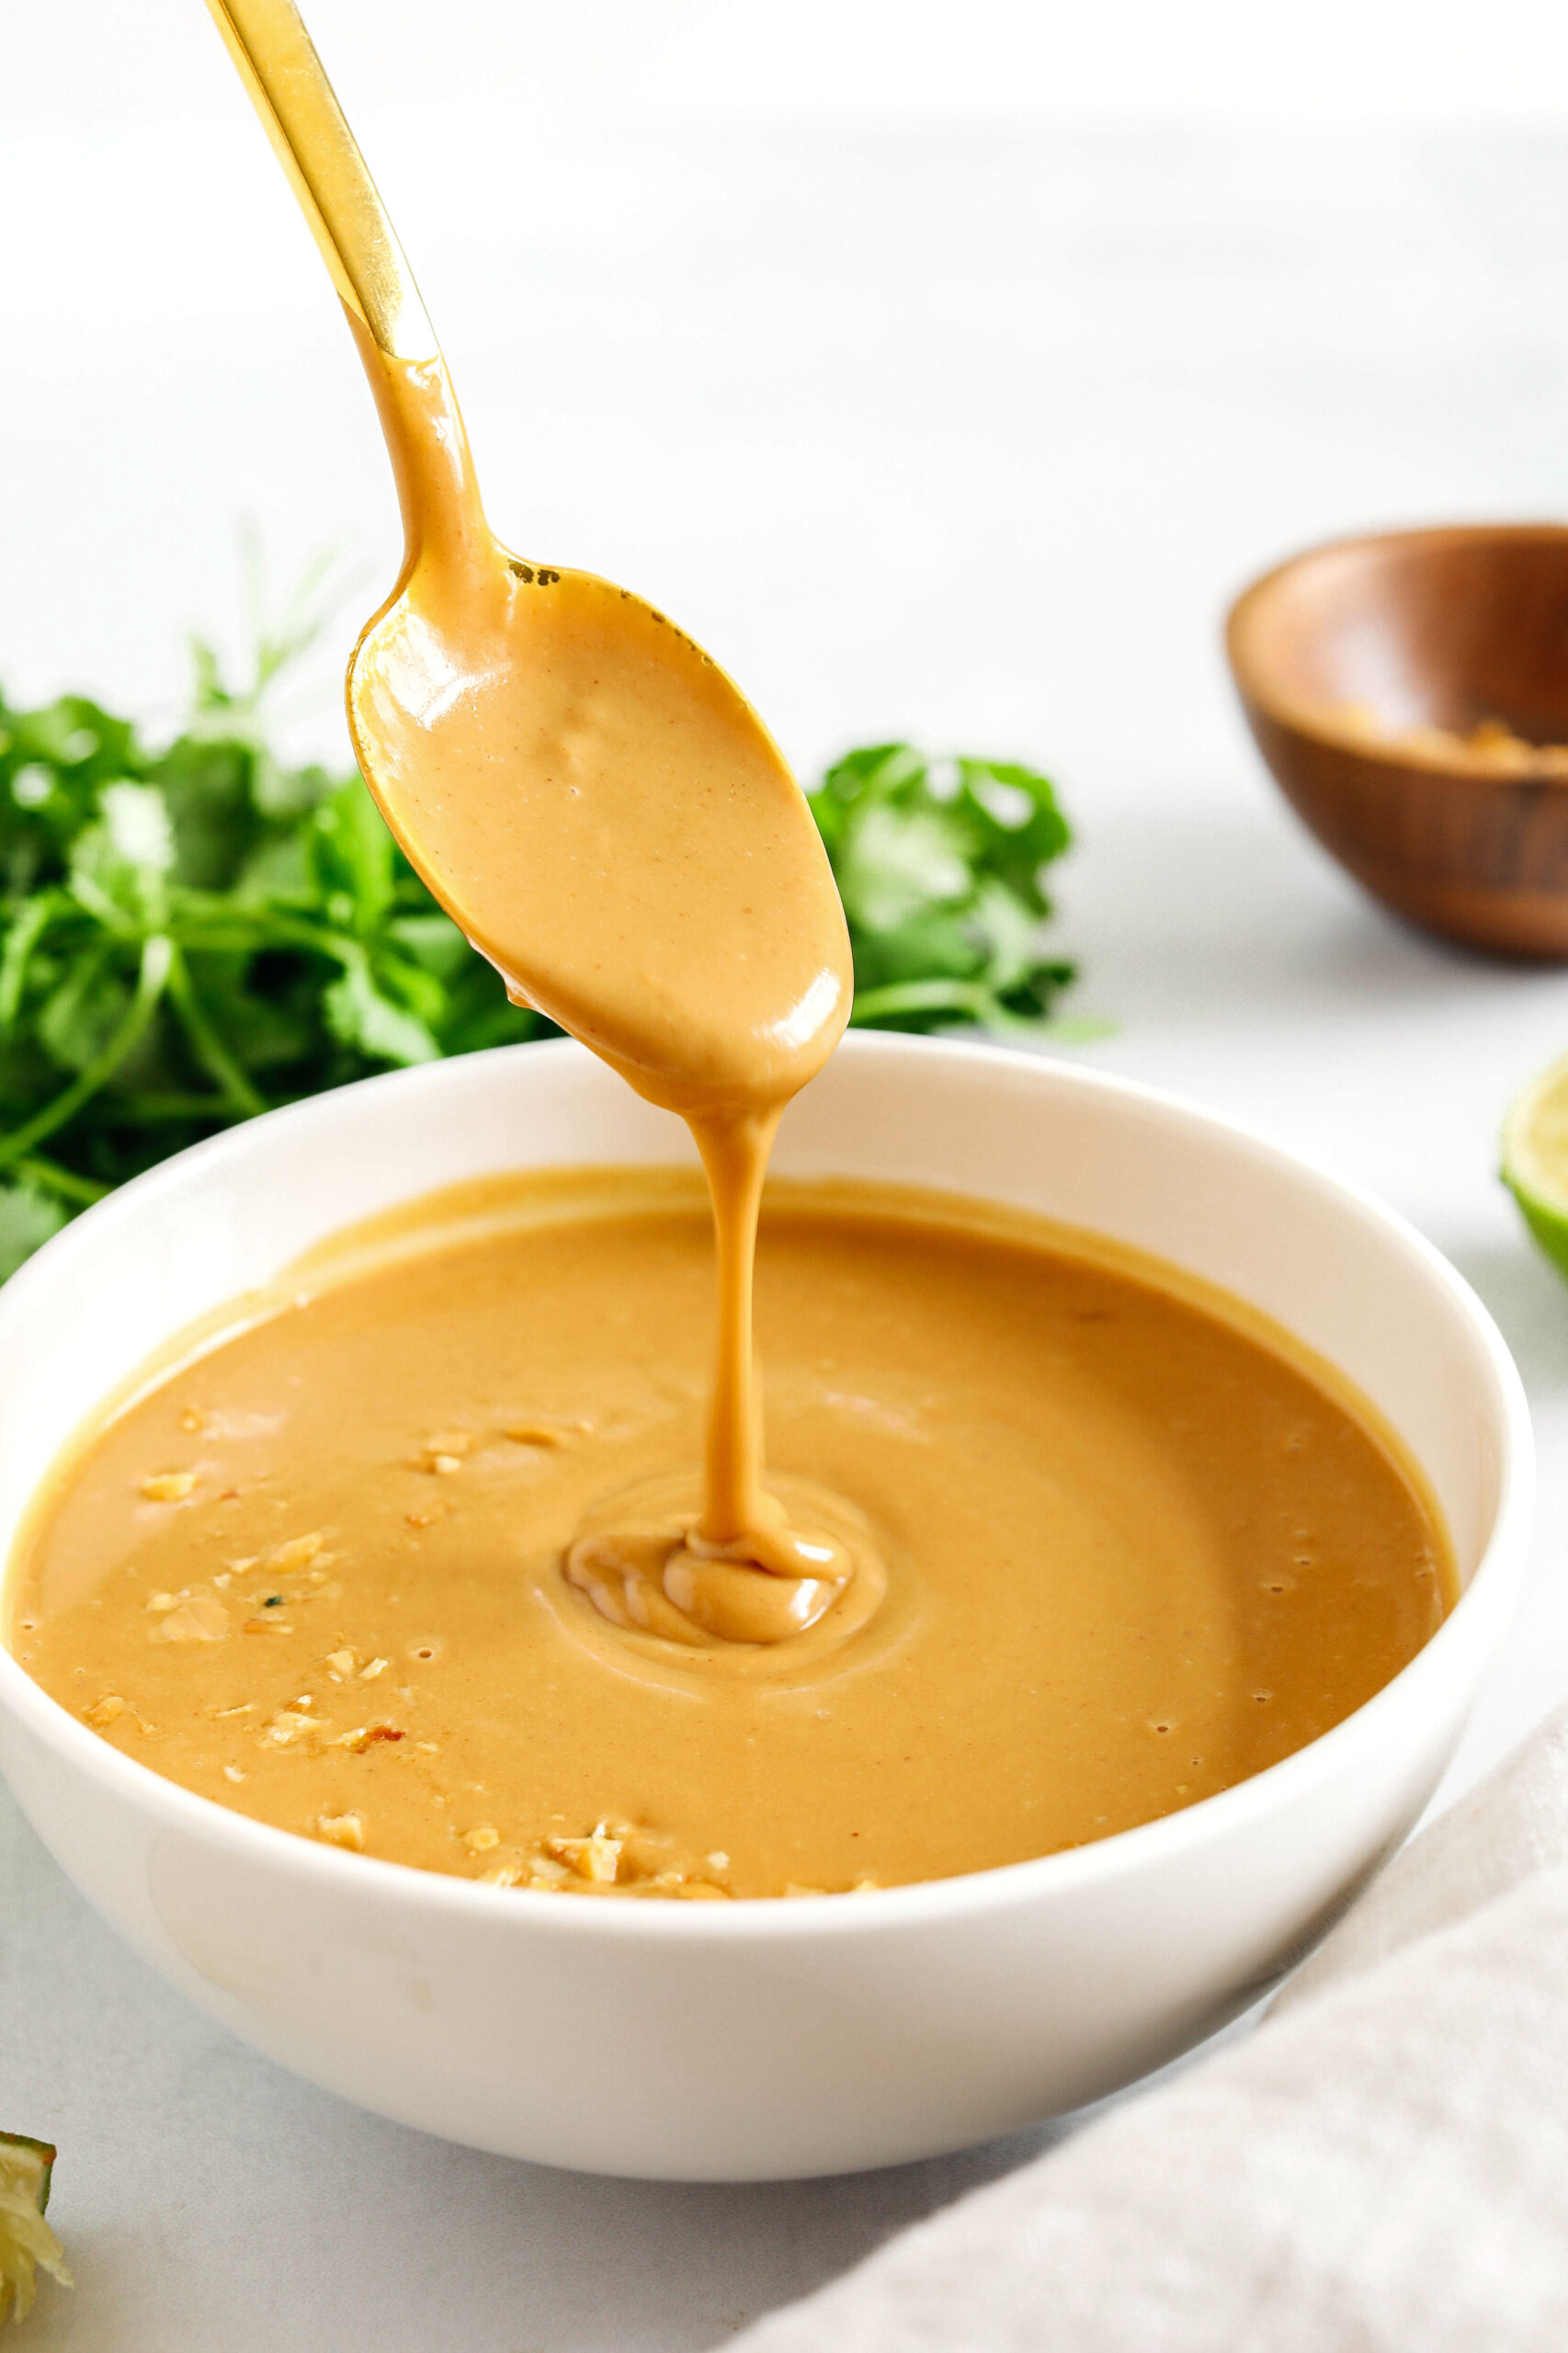 The most delicious Peanut Dipping Sauce loaded with flavors like garlic, ginger, lime and honey all easily made in just 5 minutes! Perfect drizzled over chicken, noodles, salads, wraps and so much more!